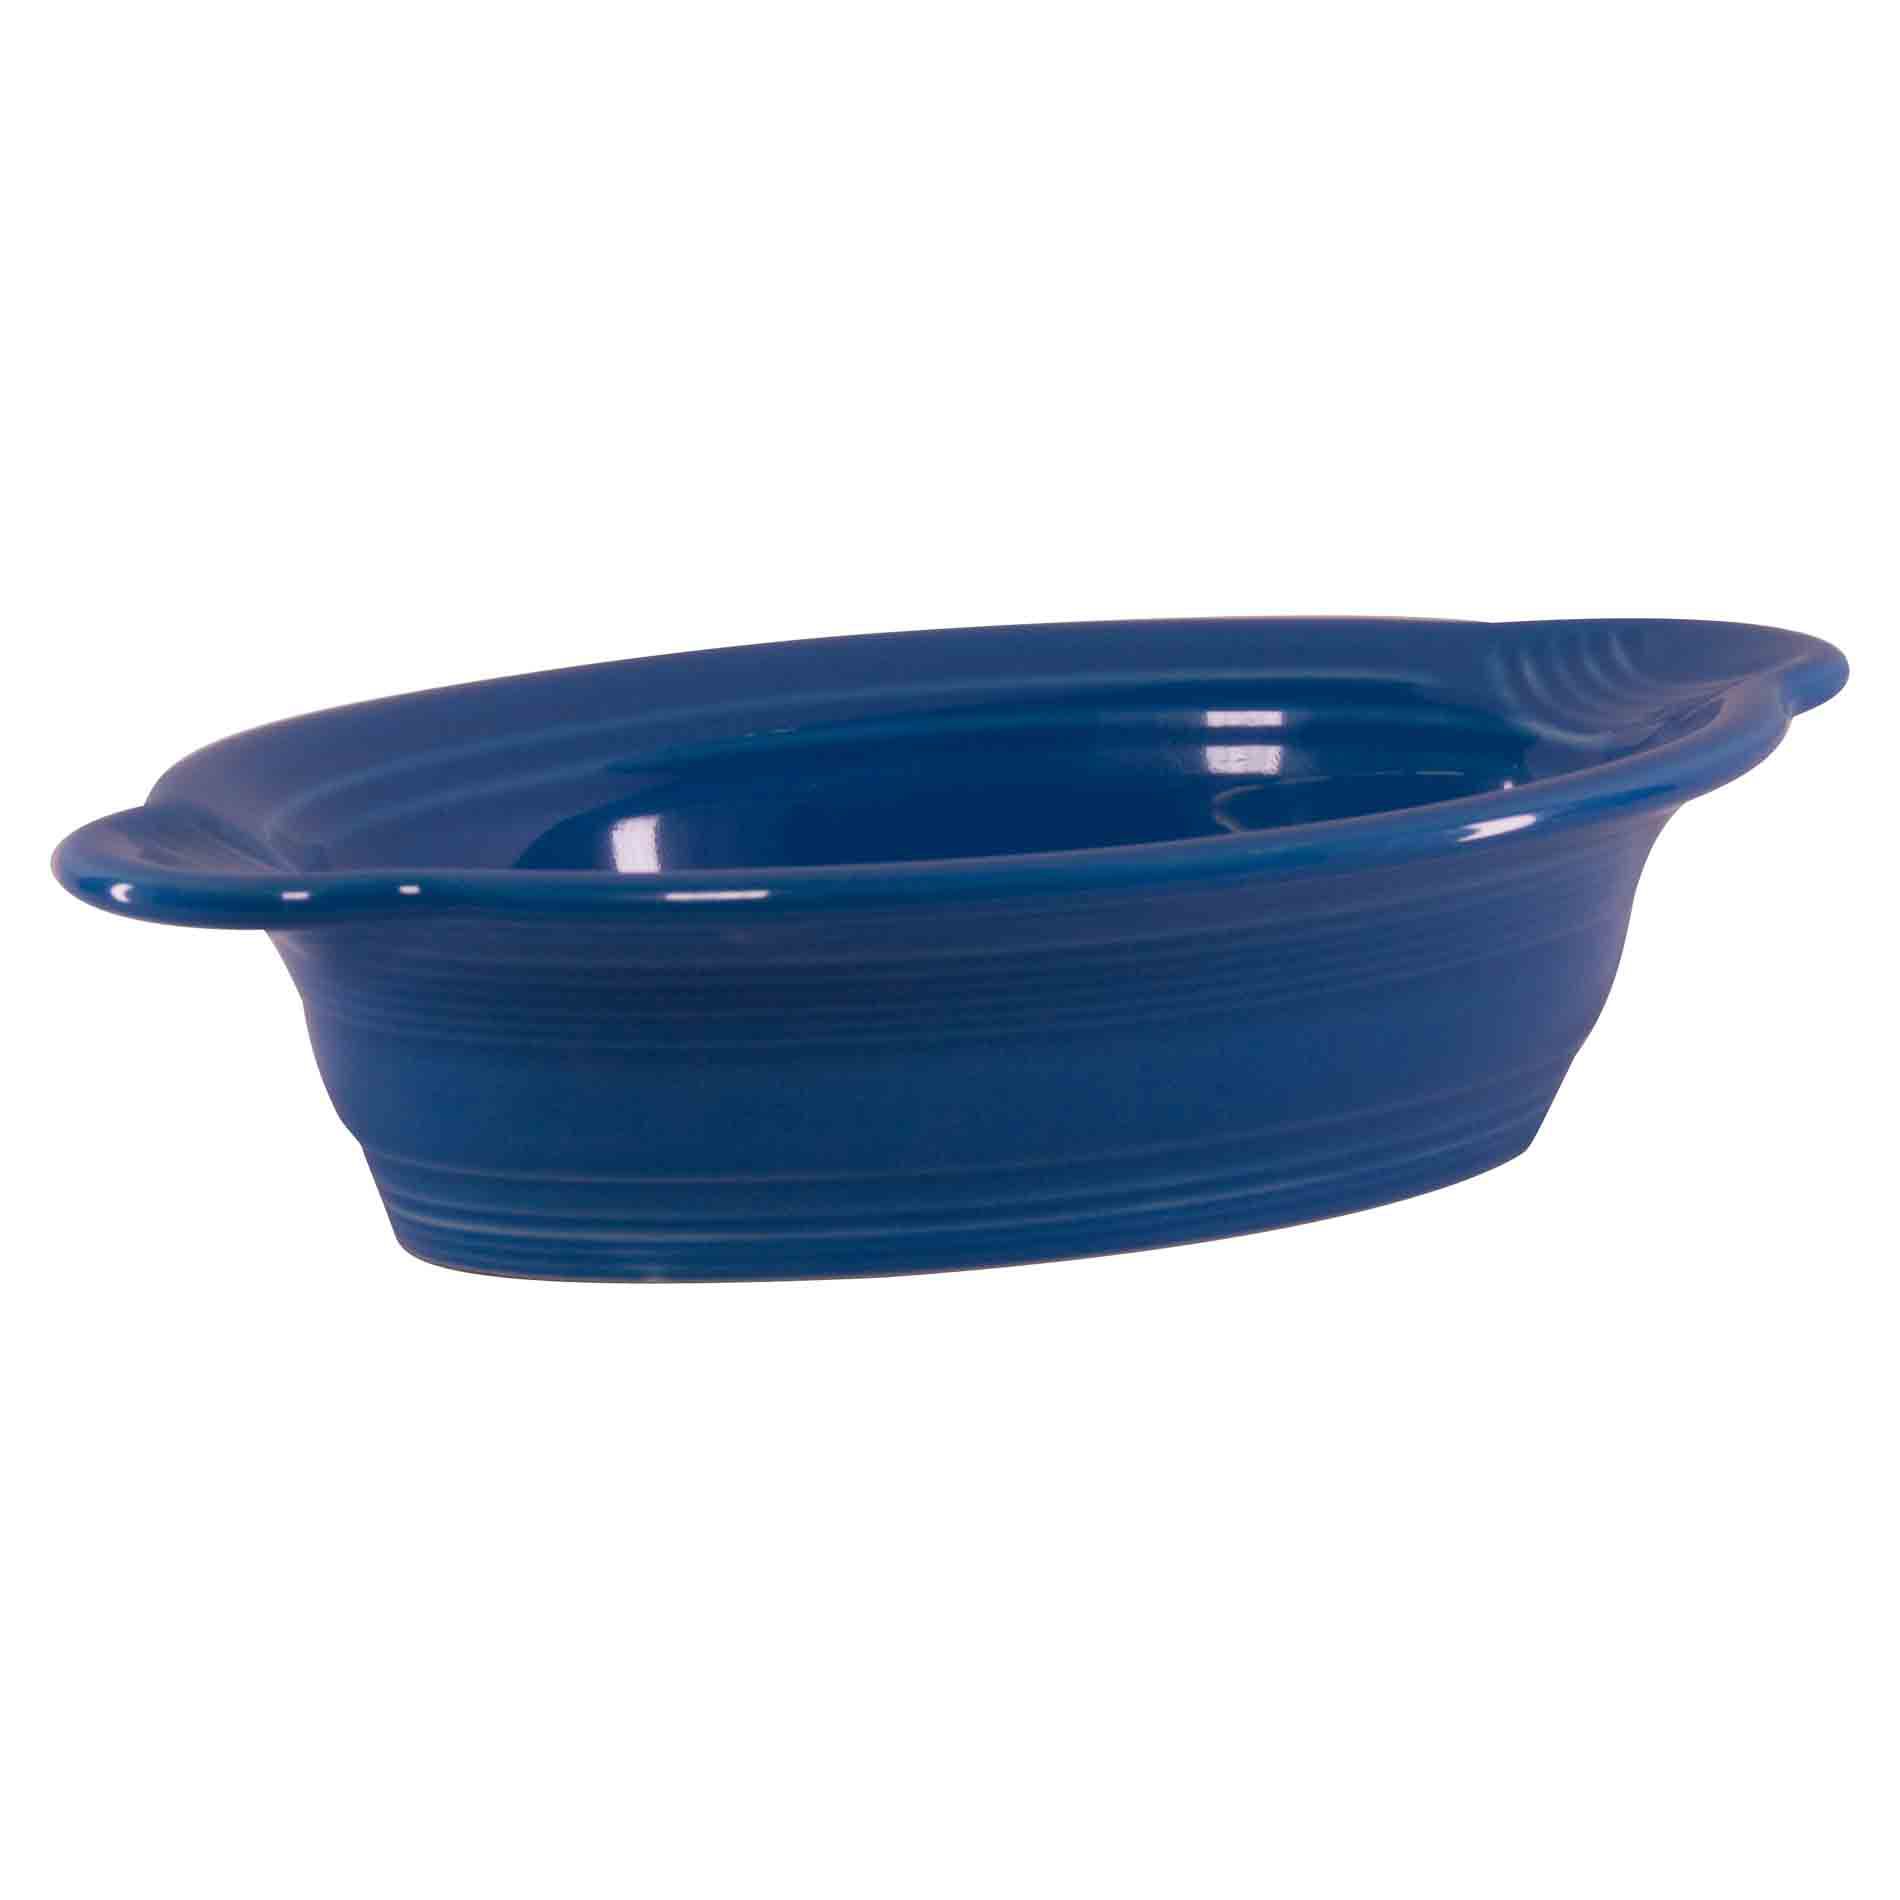 Fiesta Set of 2 Individual Oval Casserole Dishes, Peacock